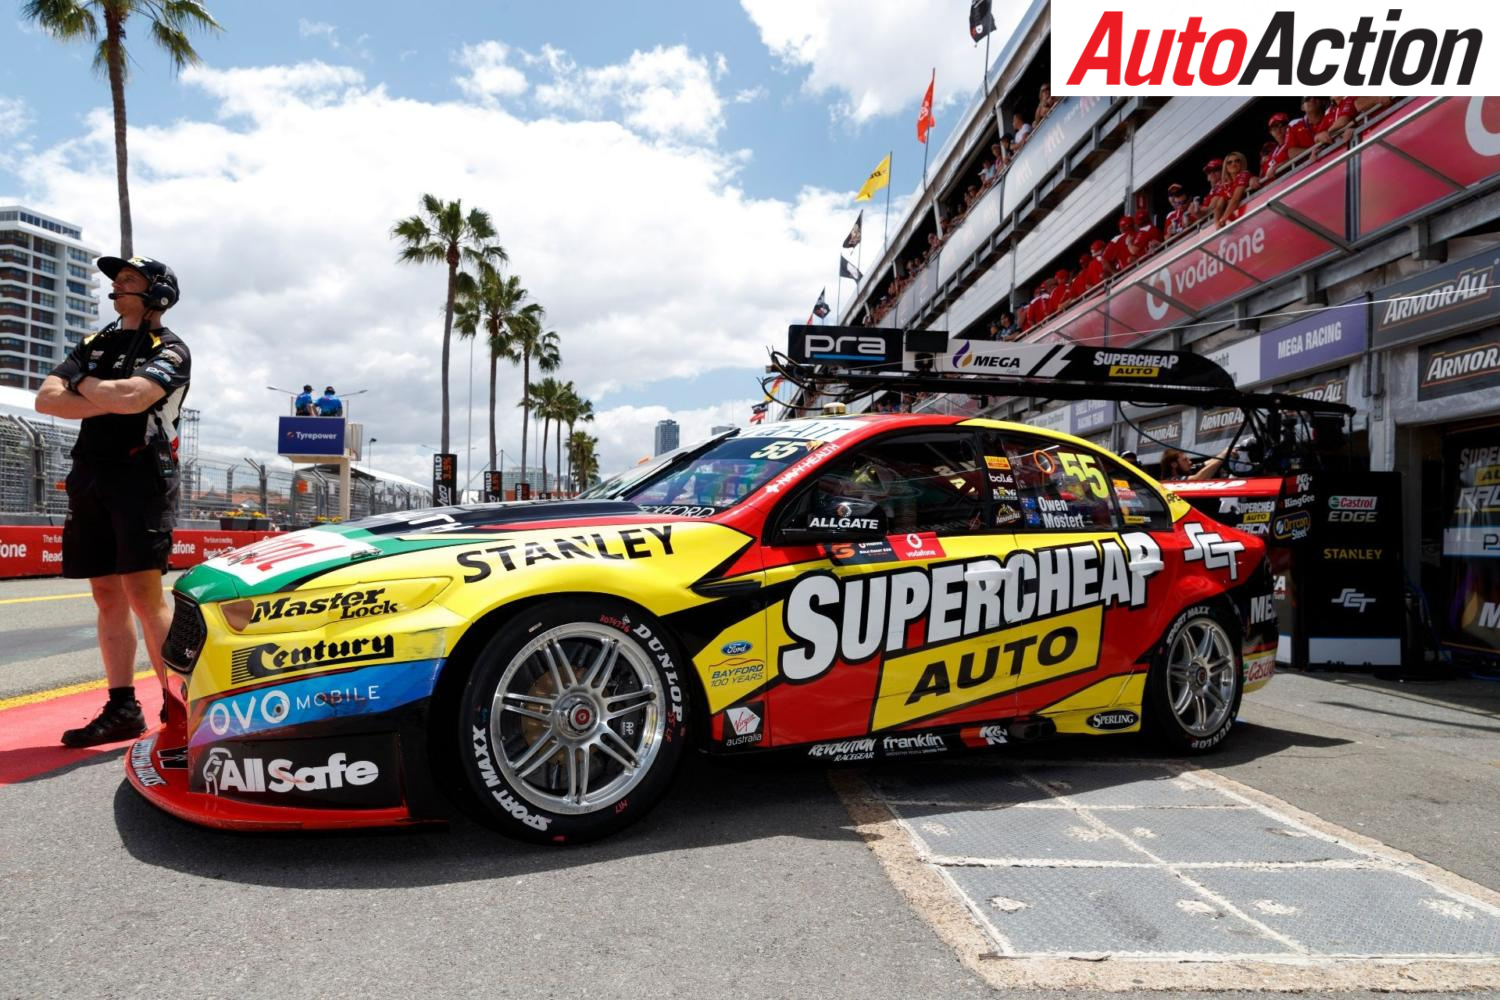 Chaz Mostert and Supercheap Auto locked in with Tickford Racing for two more years - Photo: Supplied